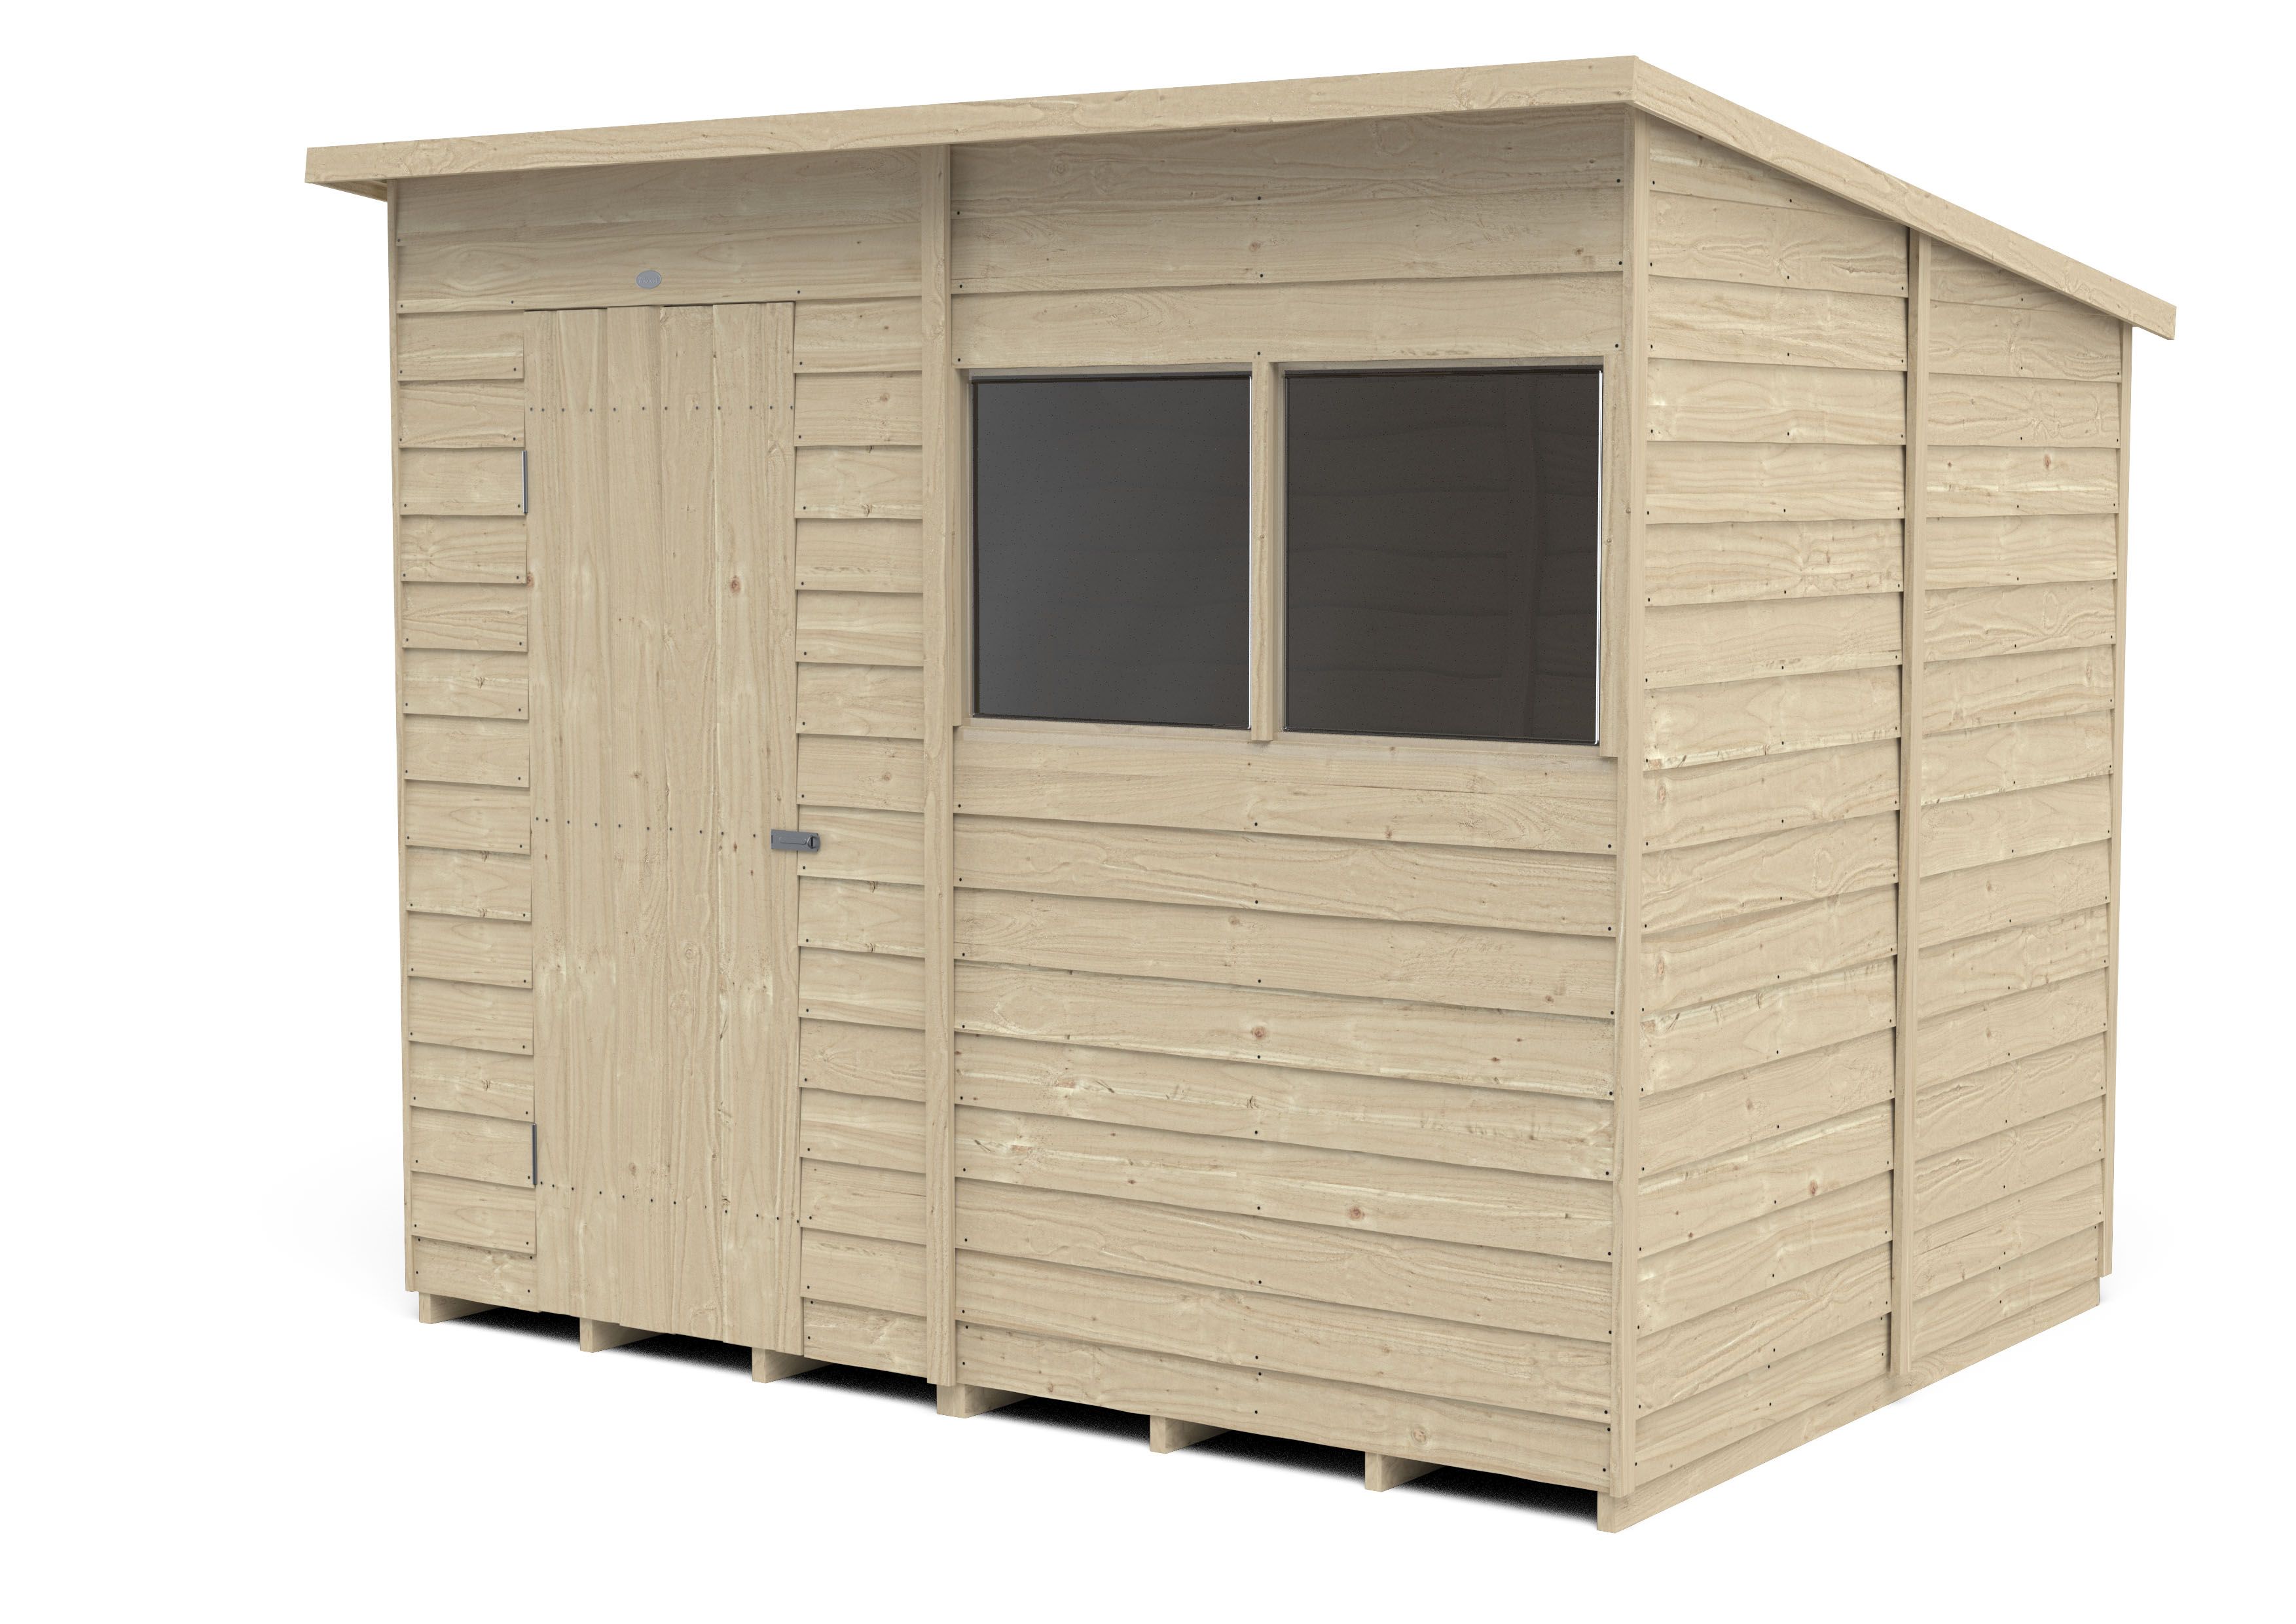 Forest Garden Overlap 8x6 ft Pent Wooden Shed with floor & 2 windows (Base included) - Assembly service included